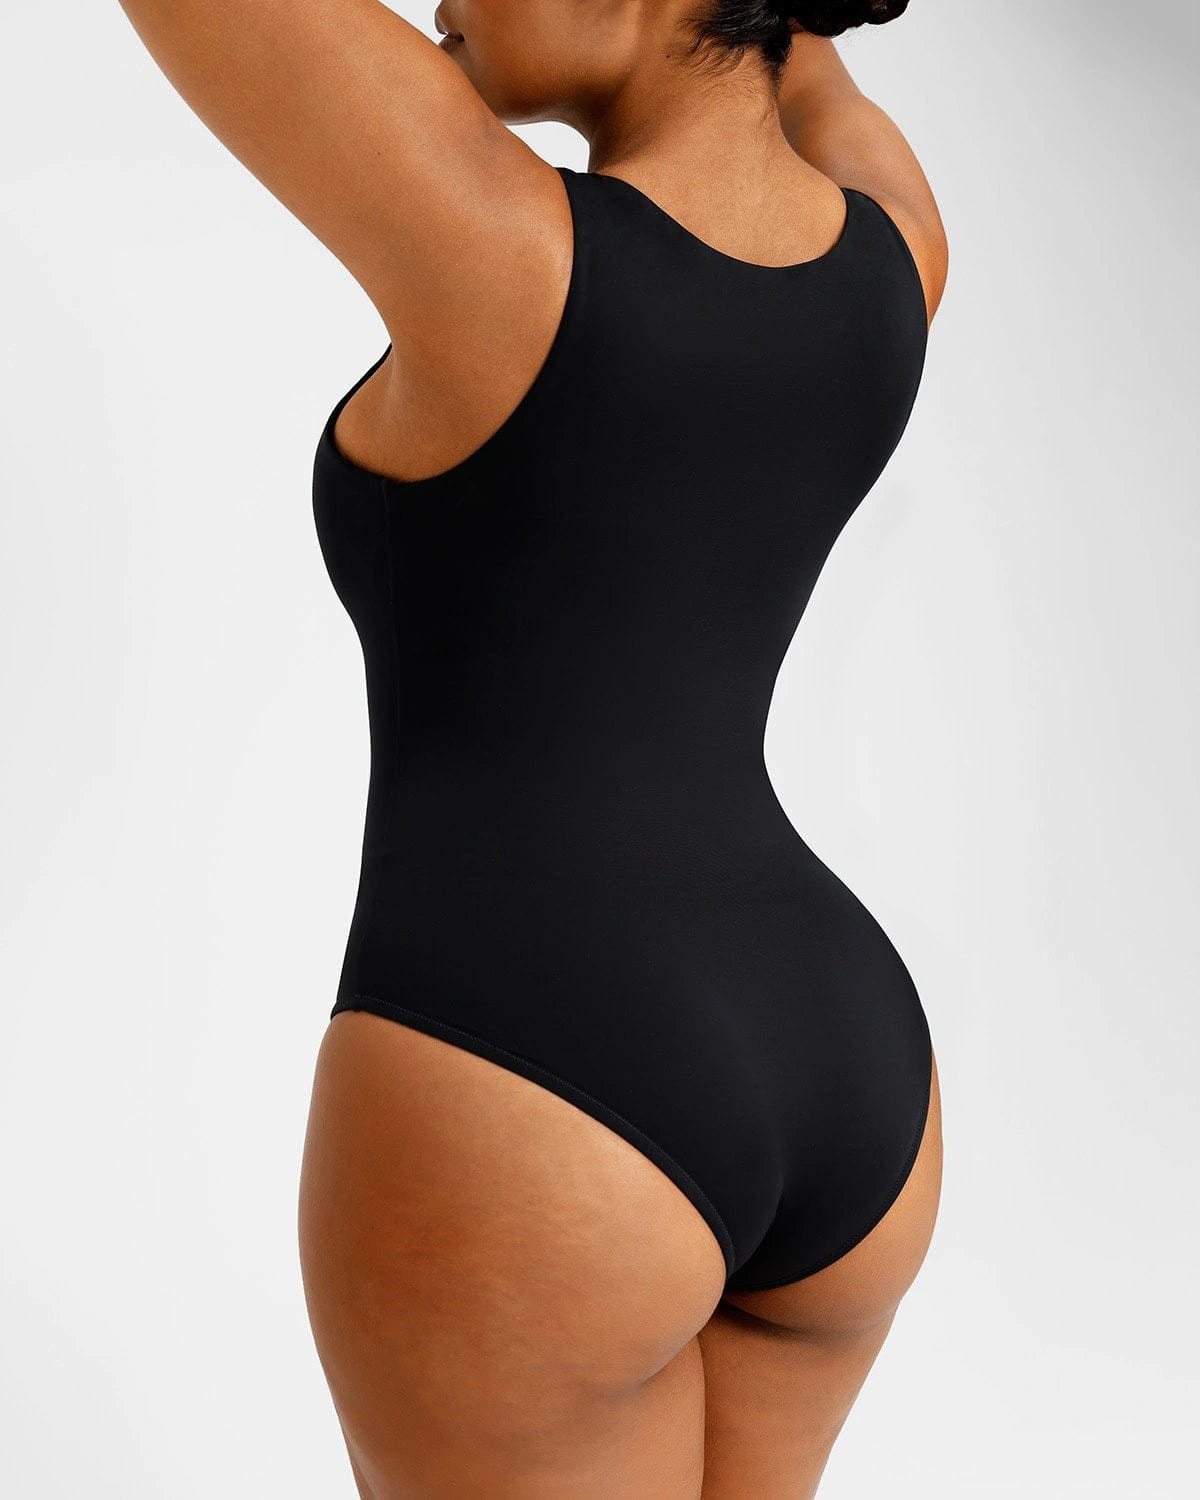 Shapellx Launches Swimsuit Shapewear Line Promoting Body